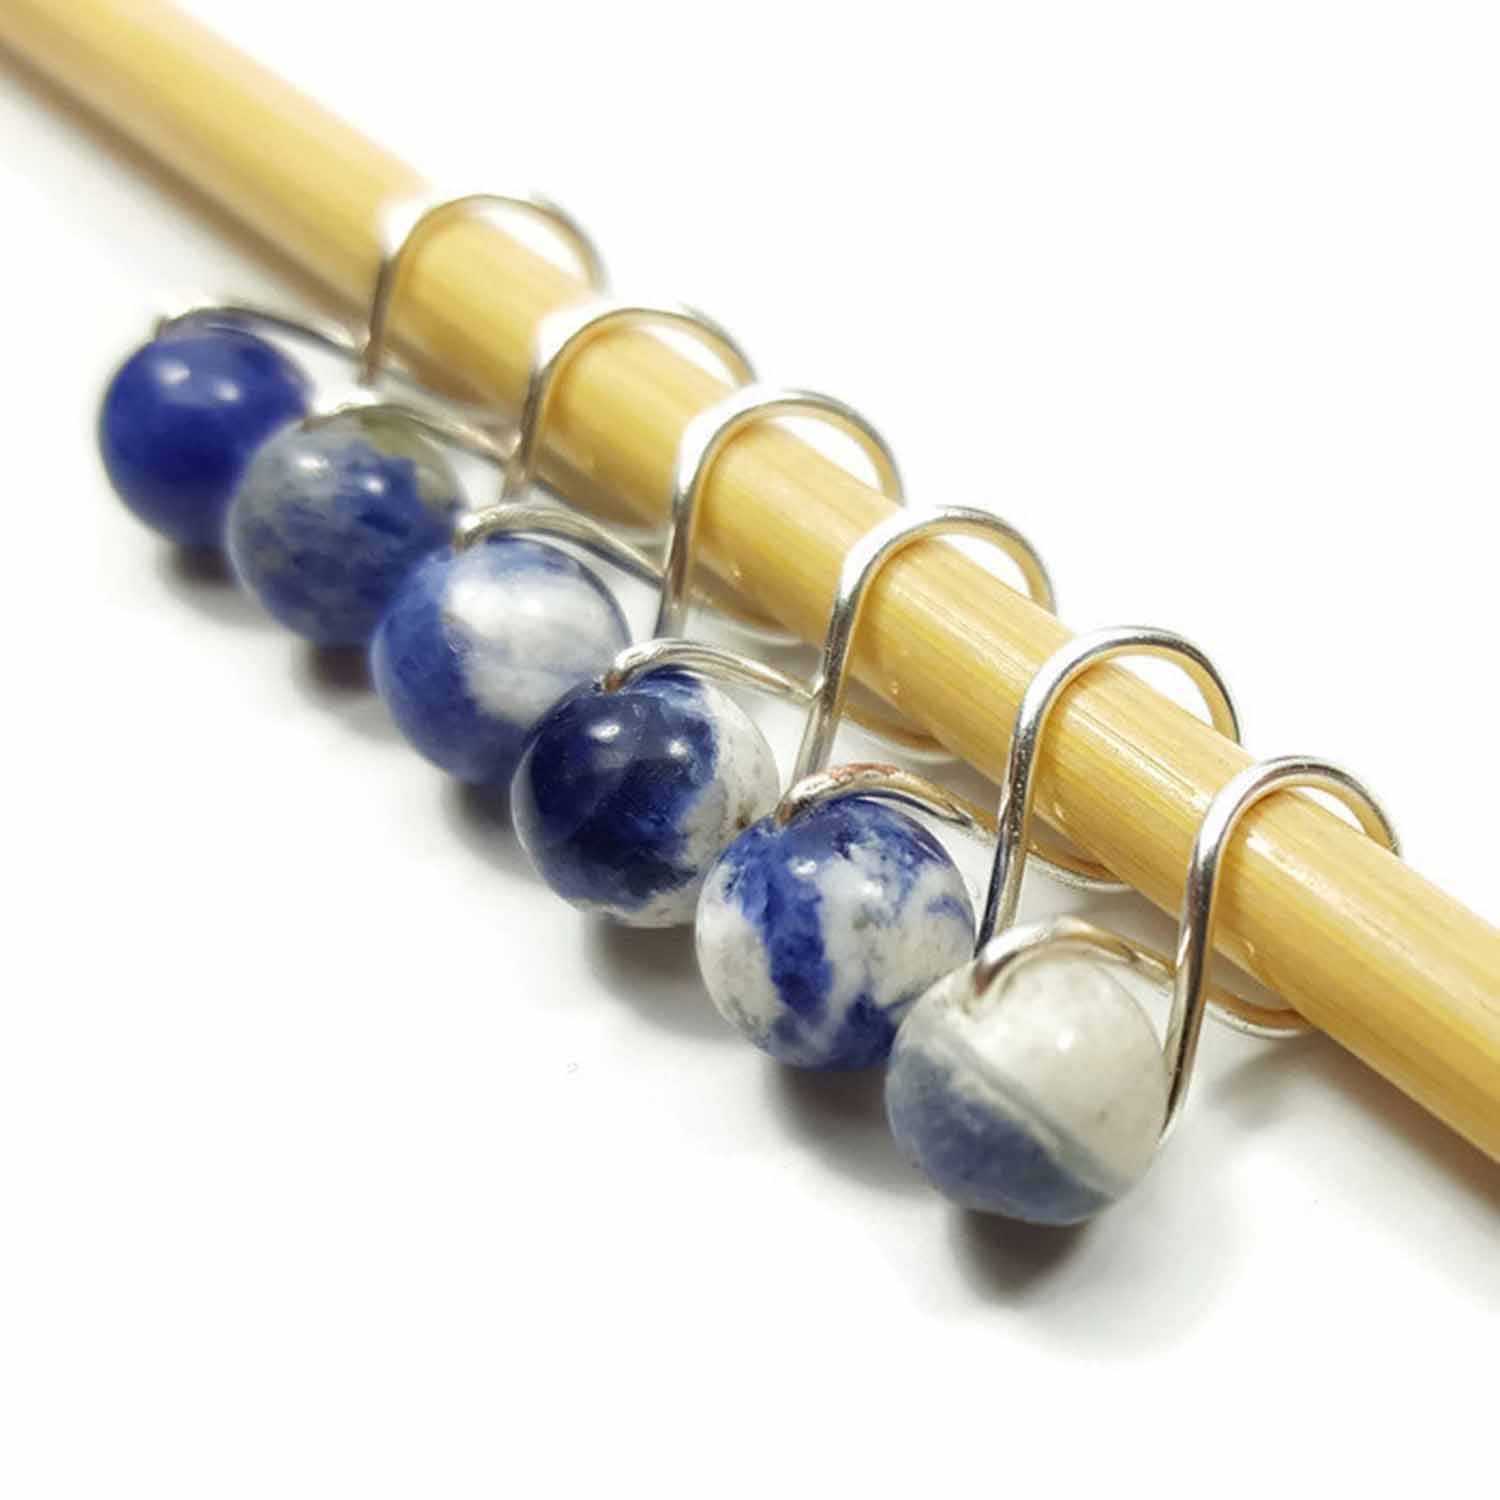 Blue Sodalite Knitting or Crochet Stitch Markers